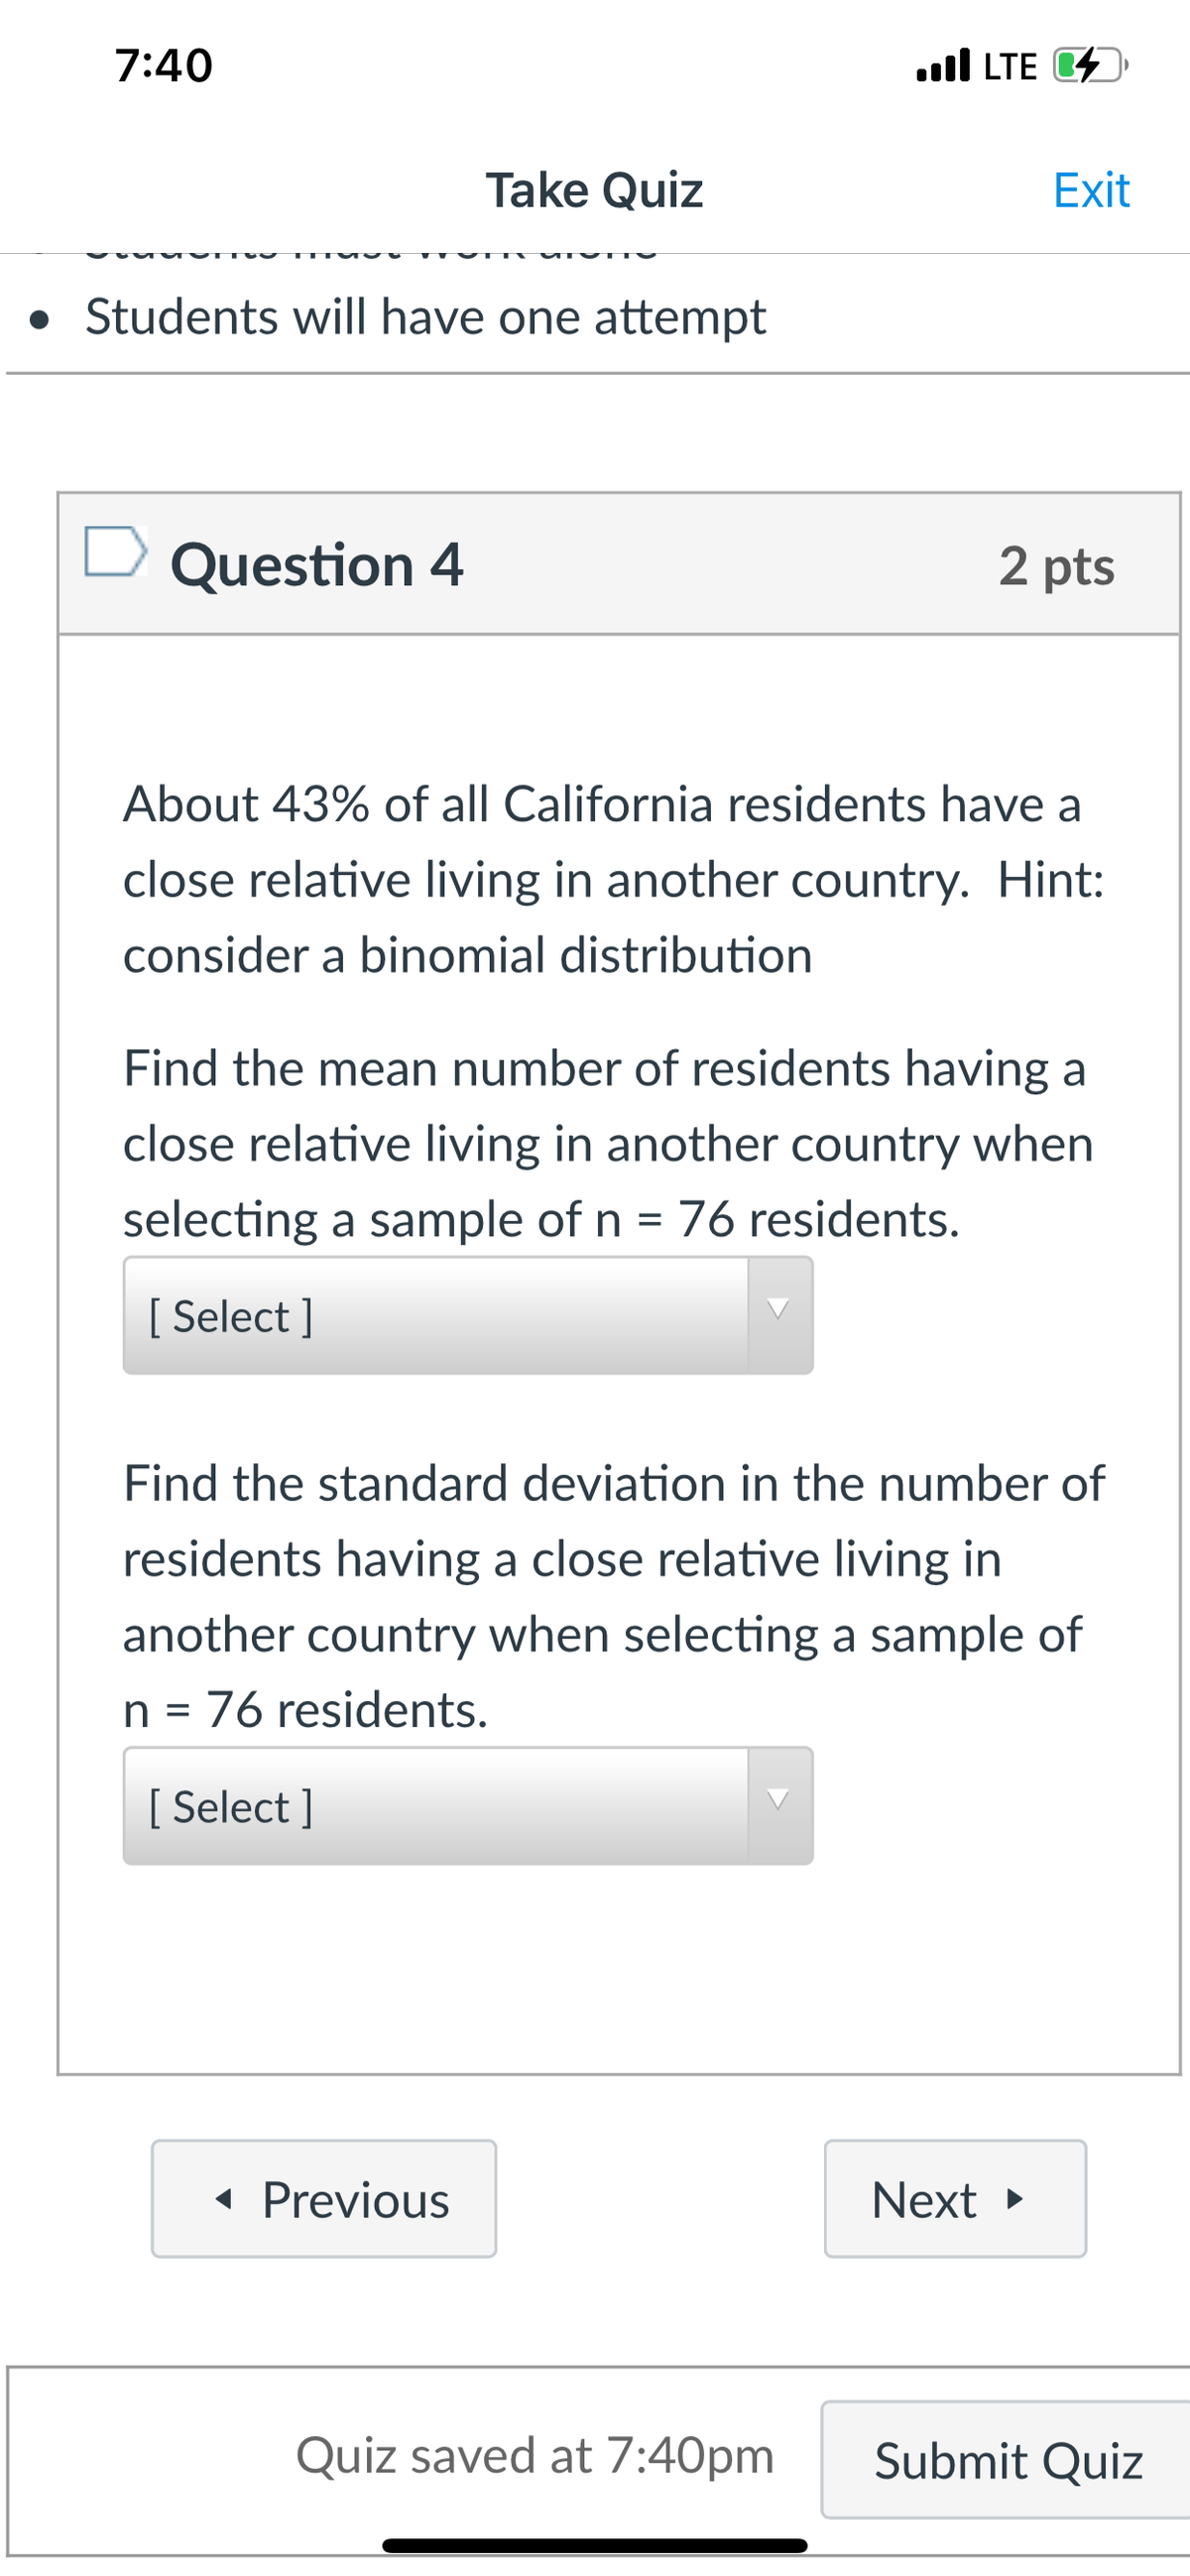 7:40
ull LTE D
Take Quiz
Exit
• Students will have one attempt
Question 4
2 pts
About 43% of all California residents have a
close relative living in another country. Hint:
consider a binomial distribution
Find the mean number of residents having a
close relative living in another country when
selecting a sample of n = 76 residents.
[ Select ]
Find the standard deviation in the number of
residents having a close relative living in
another country when selecting a sample of
n = 76 residents.
[ Select ]
« Previous
Next >
Quiz saved at 7:40pm
Submit Quiz
